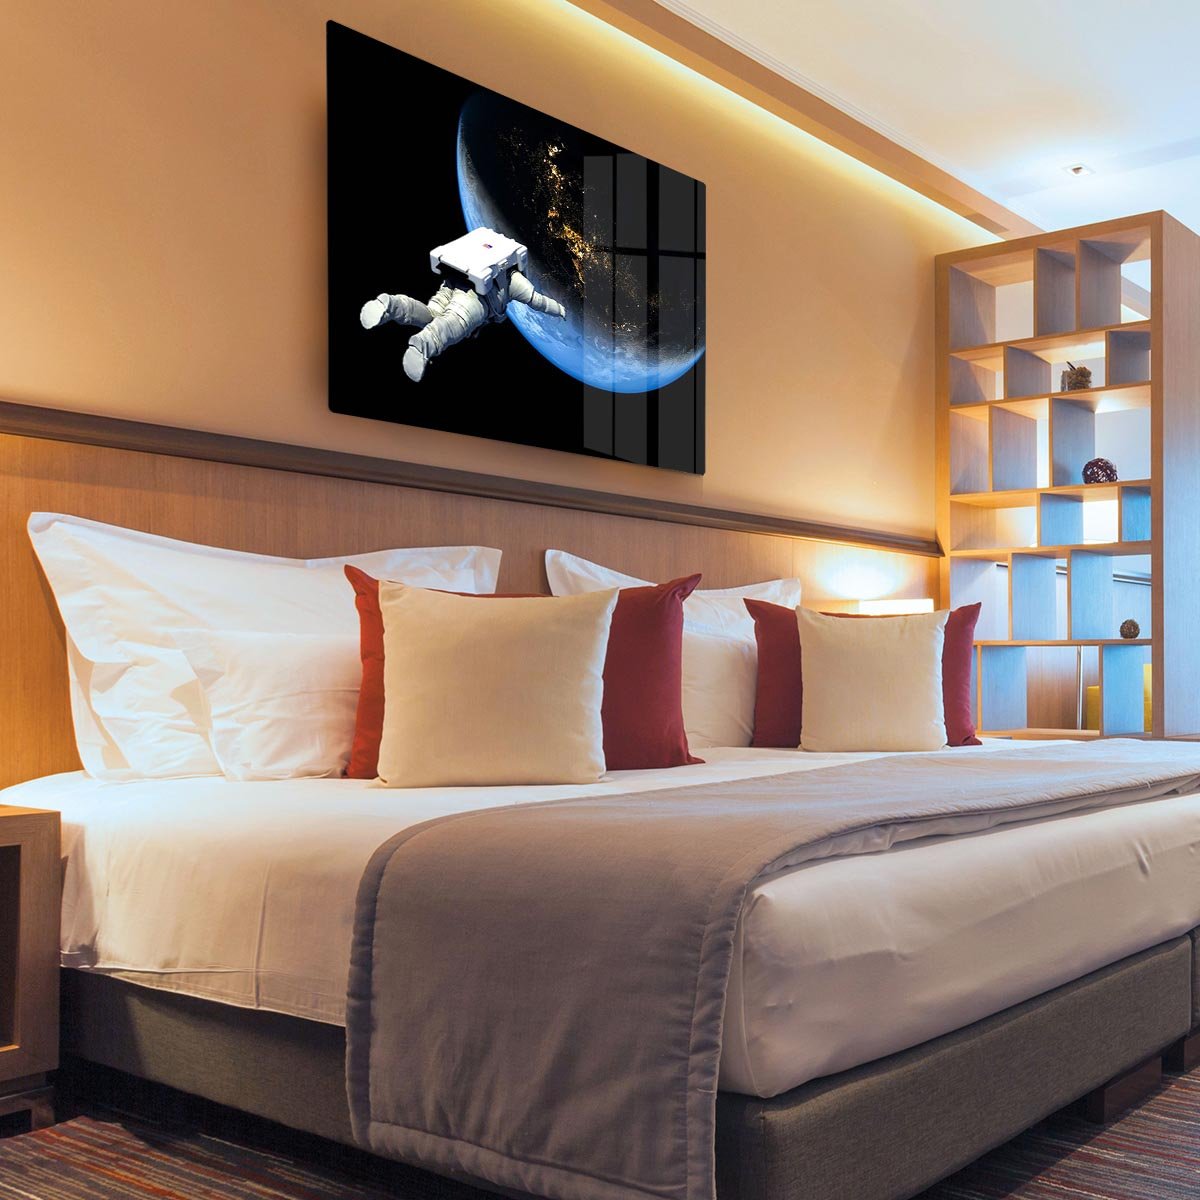 Astronaut Floating to Earth HD Metal Print